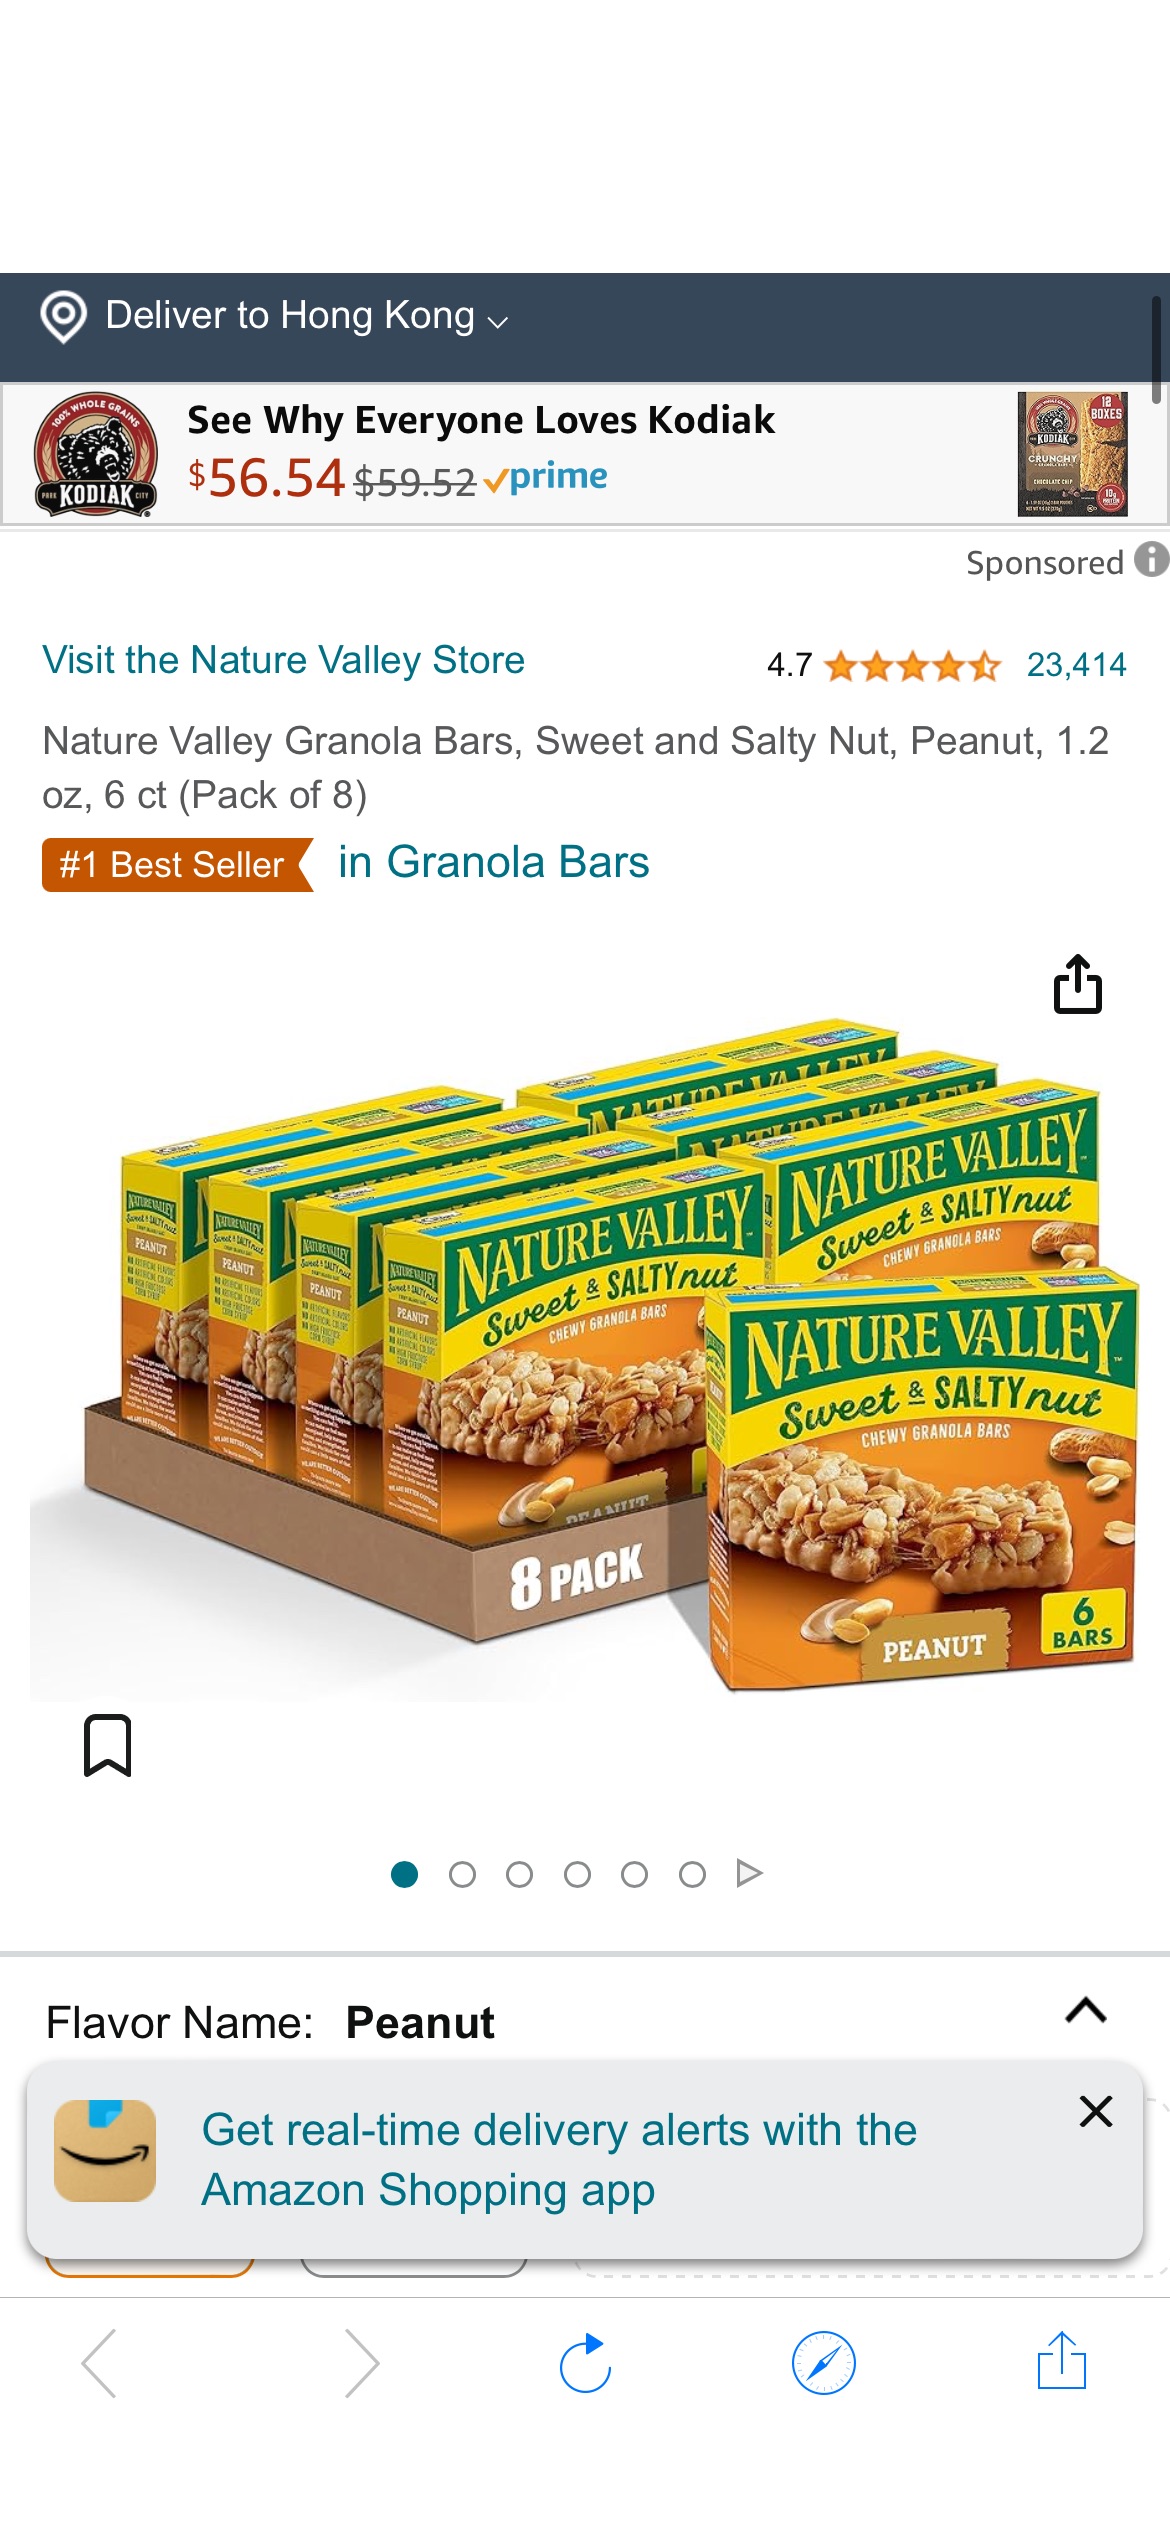 Amazon.com: Nature Valley Granola Bars, Sweet and Salty Nut, Peanut, 1.2 oz, 6 ct (Pack of 8) : Grocery & Gourmet Food